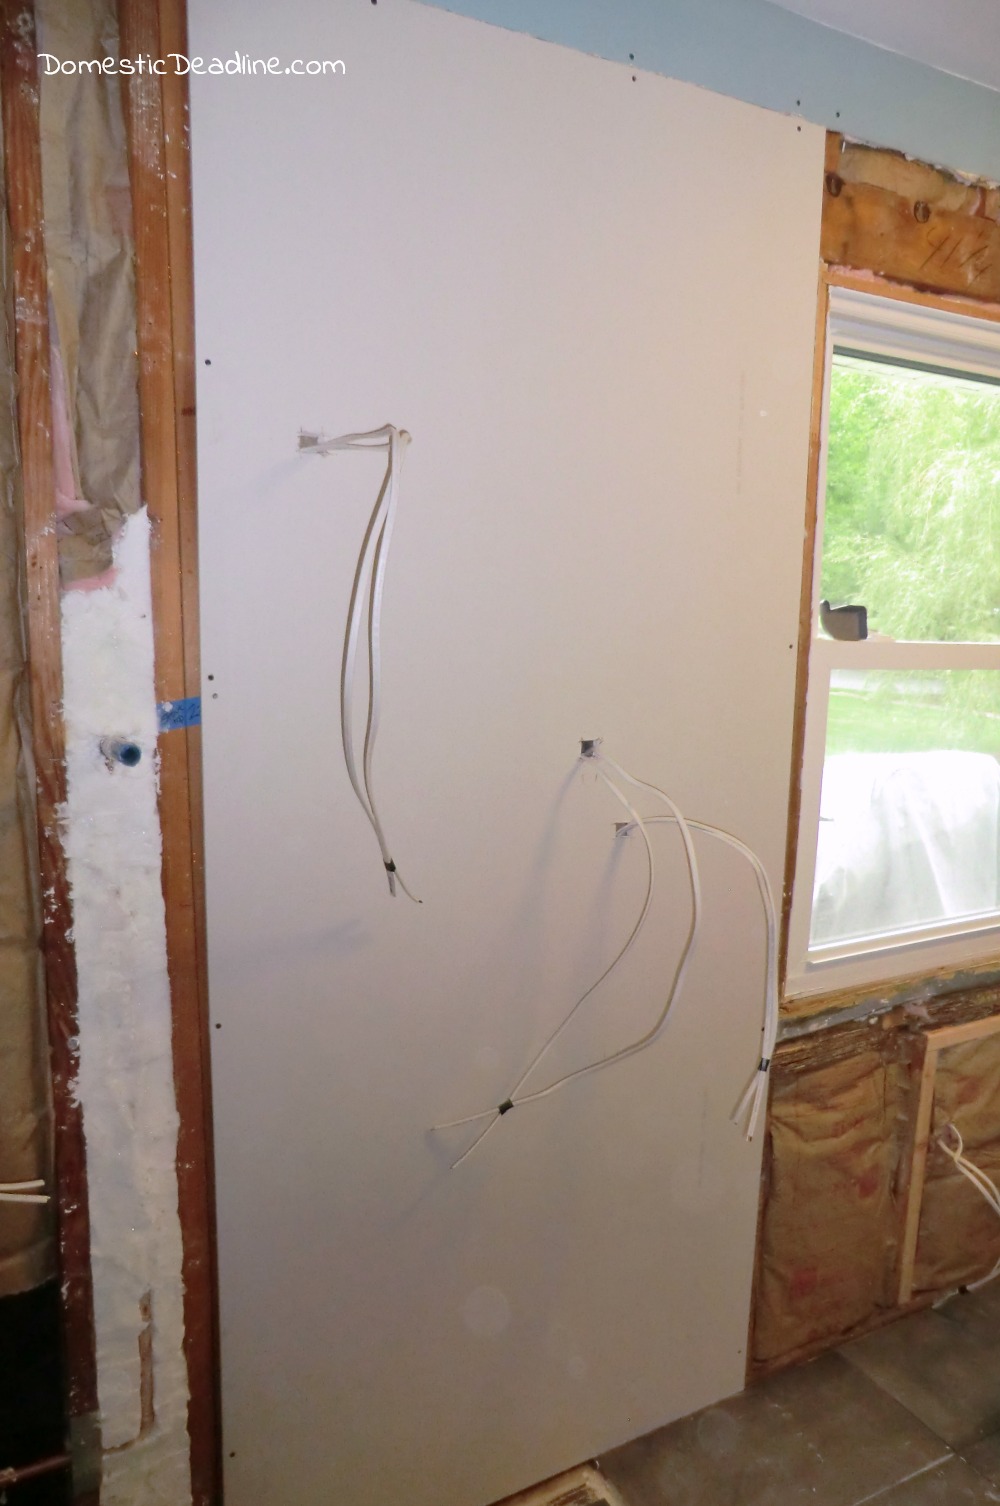 Planning and Installing Electrical Outlets in a Kitchen Renovation – Domestic Deadline - One of the most important parts of planning a kitchen is the placement of electrical outlets. How we planned, wired, and installed outlets in our kitchen